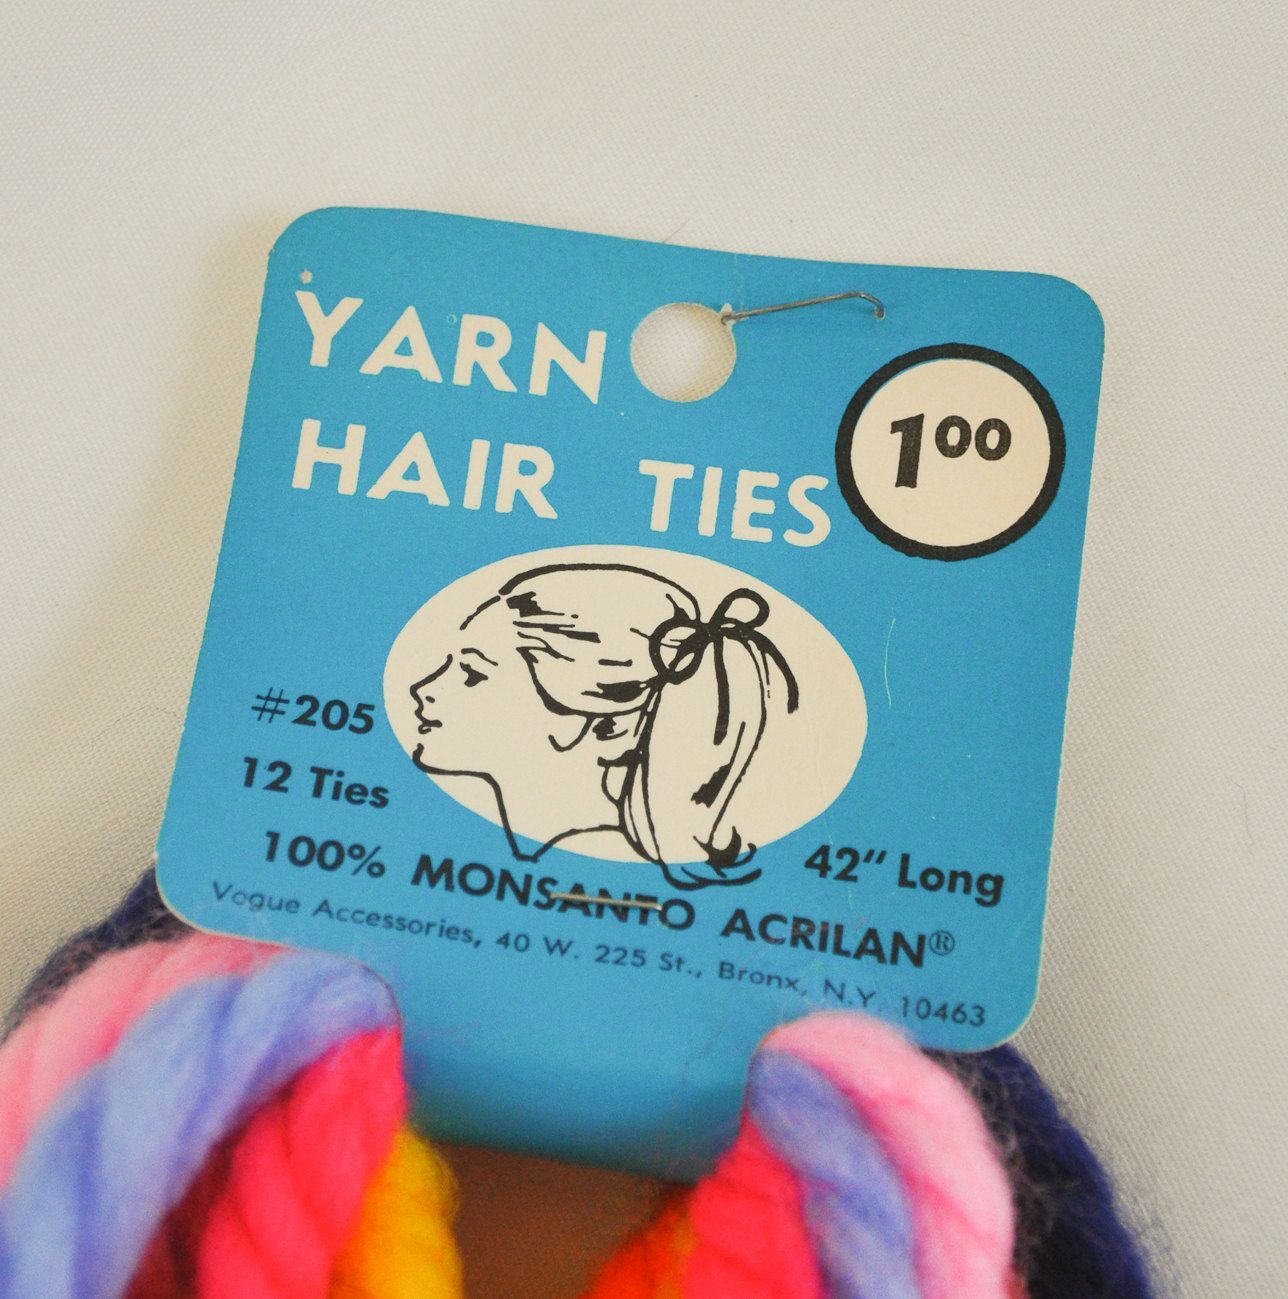 1970s yarn hair ties. We used different colored ones on the Great Danes when the